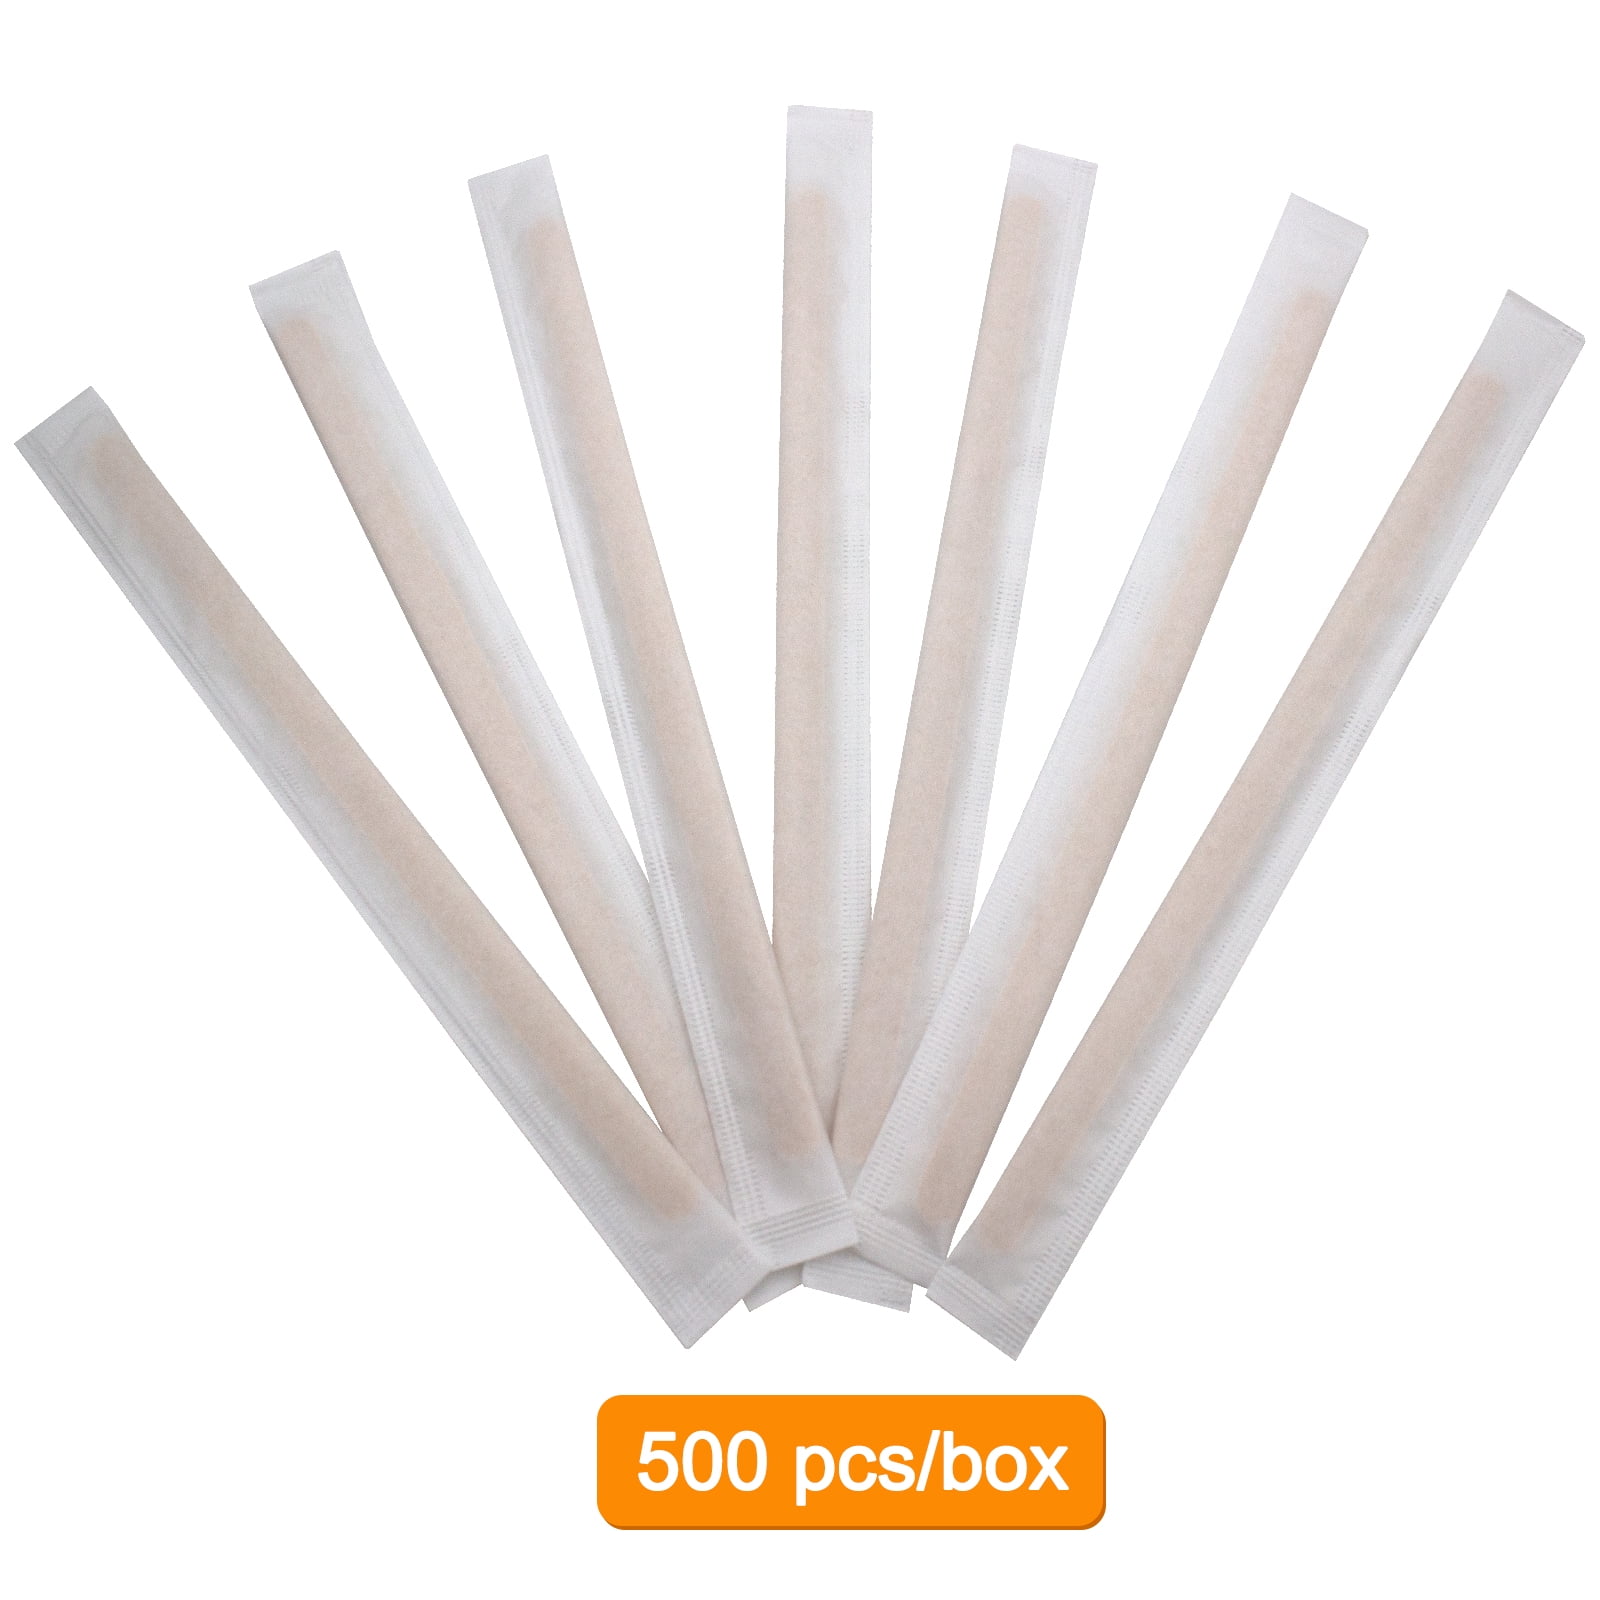 Amkoskr 1000Pcs Disposable Wood Coffee Stir Sticks 5.5 inch Individually  Wrapped Coffee Stirrers,Natural